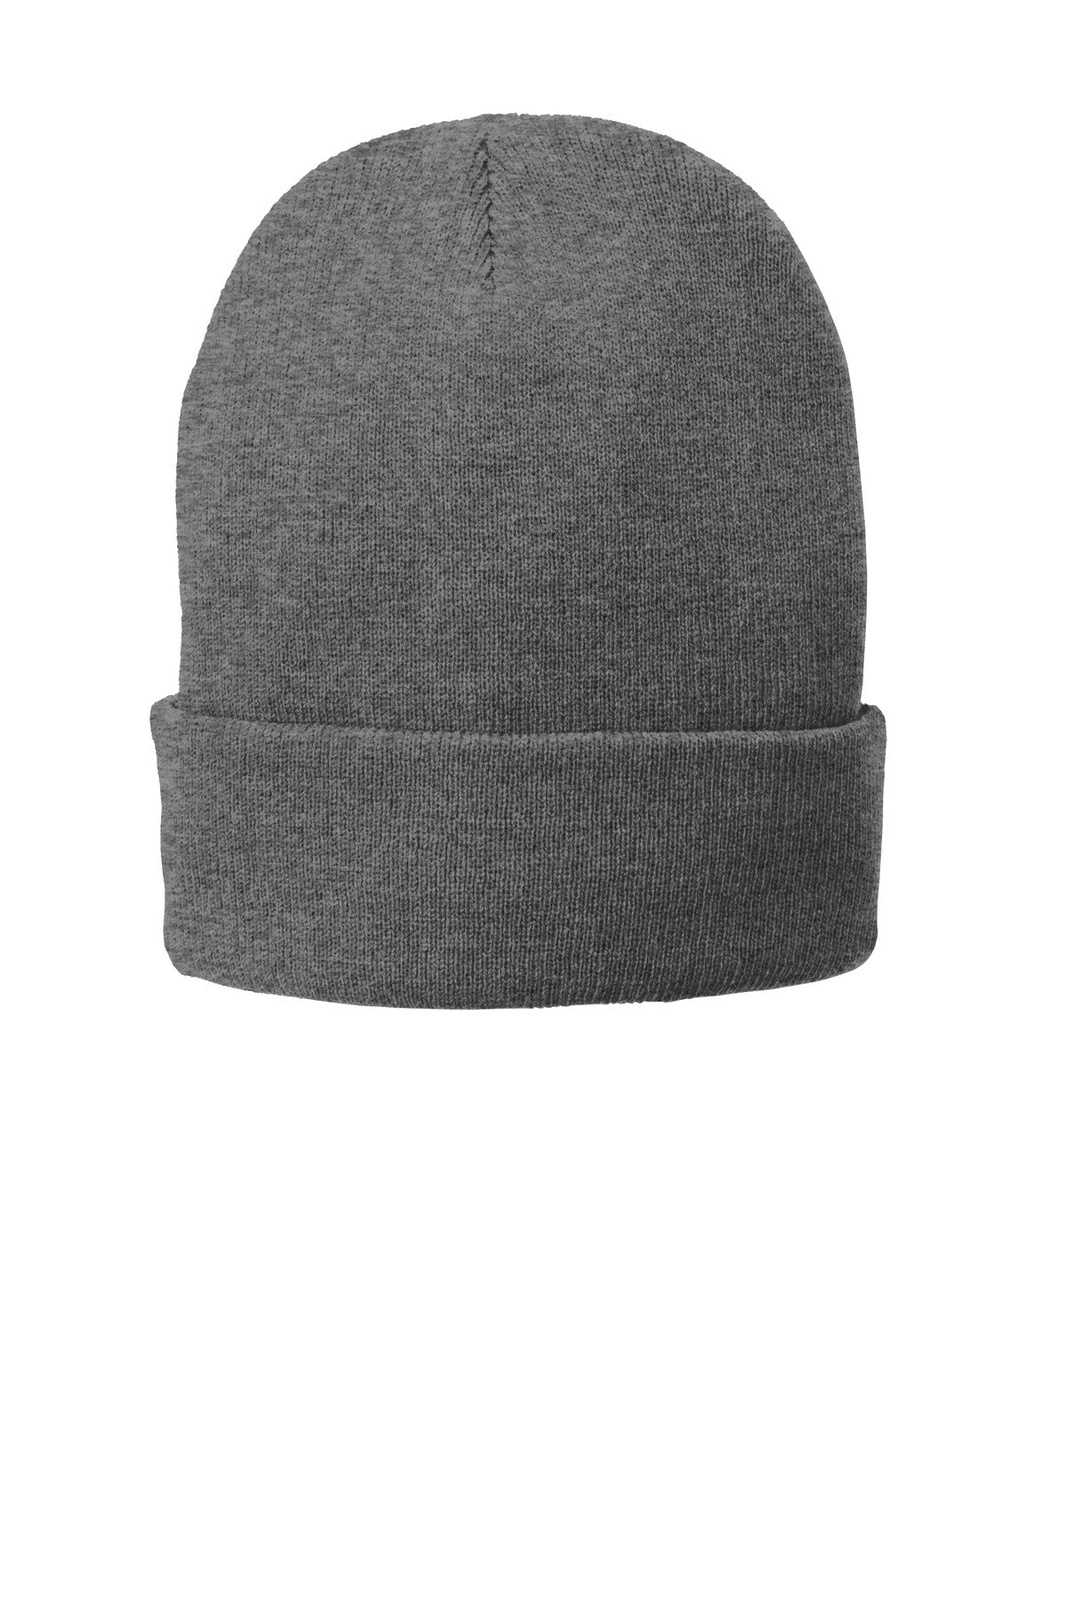 Port & Company CP90L Fleece-Lined Knit Cap with Cuff - Athletic Oxford - HIT a Double - 1